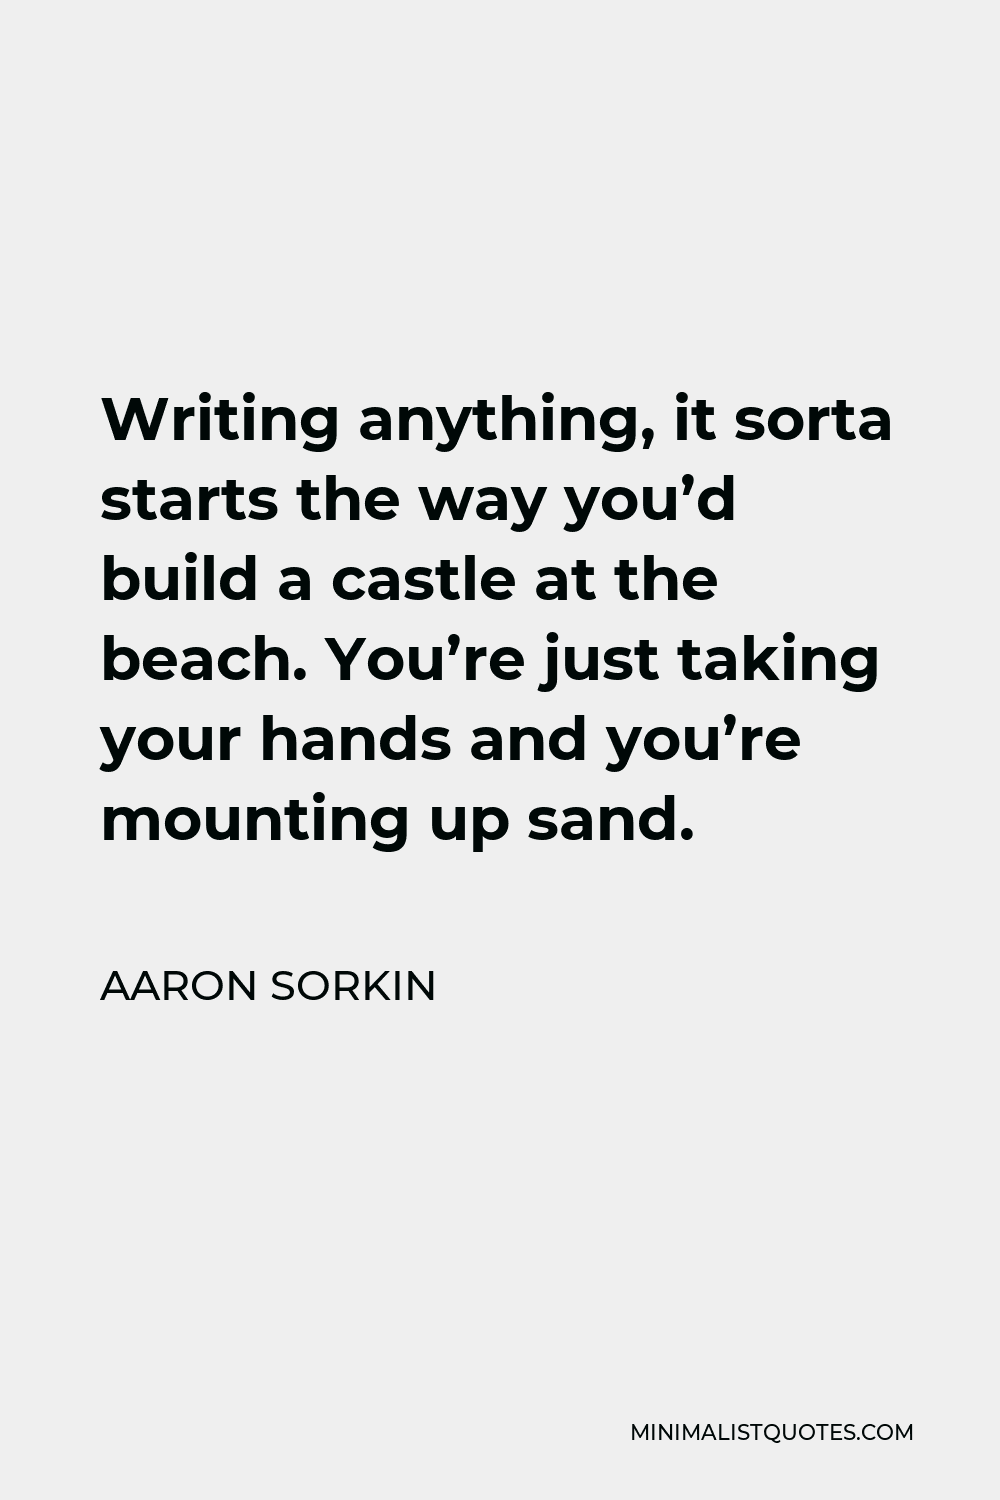 Aaron Sorkin Quote - Writing anything, it sorta starts the way you’d build a castle at the beach. You’re just taking your hands and you’re mounting up sand.